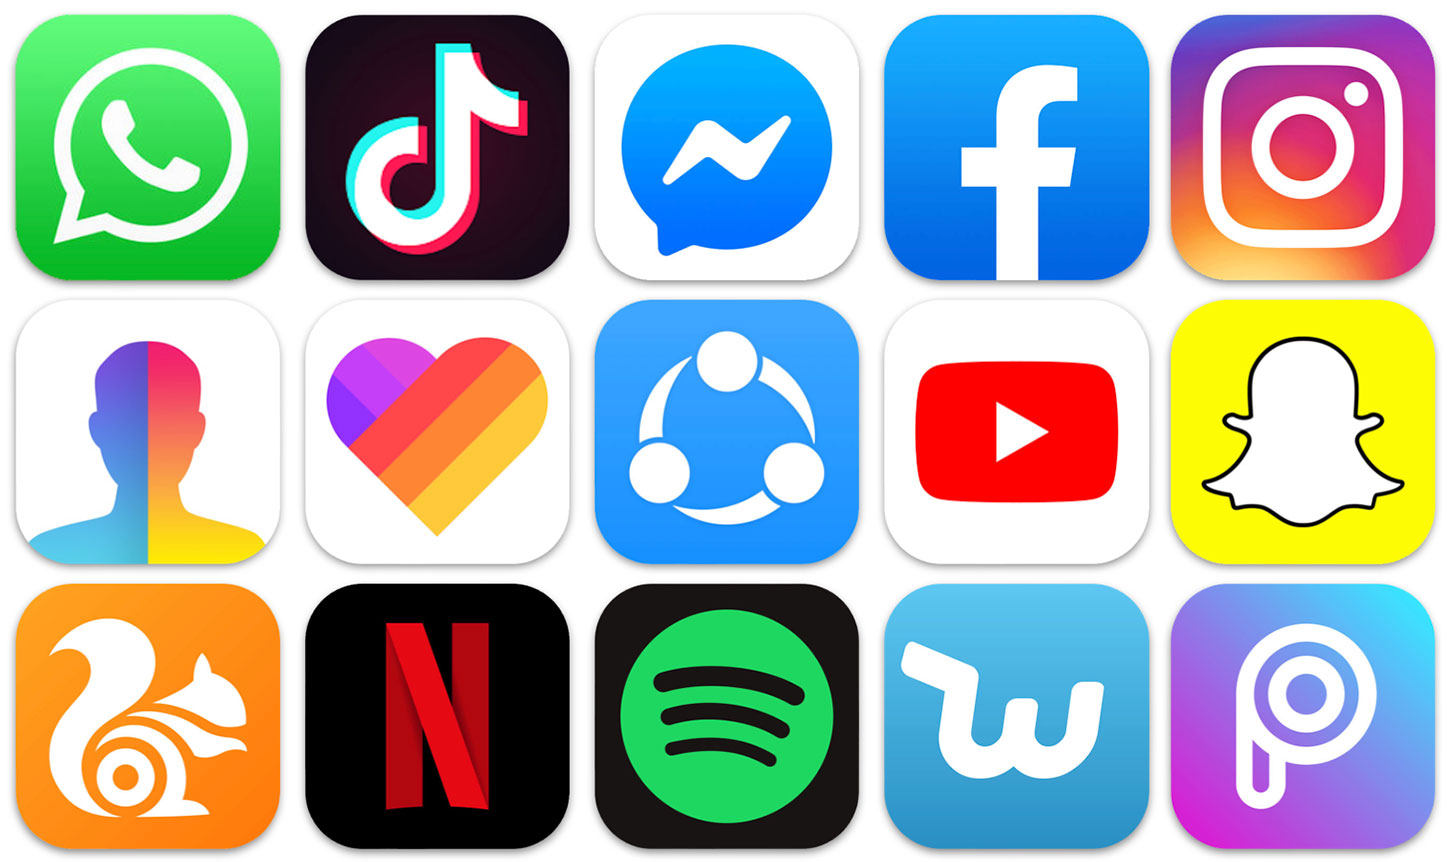 Top Apps Worldwide for Q3 2019 Banner Image